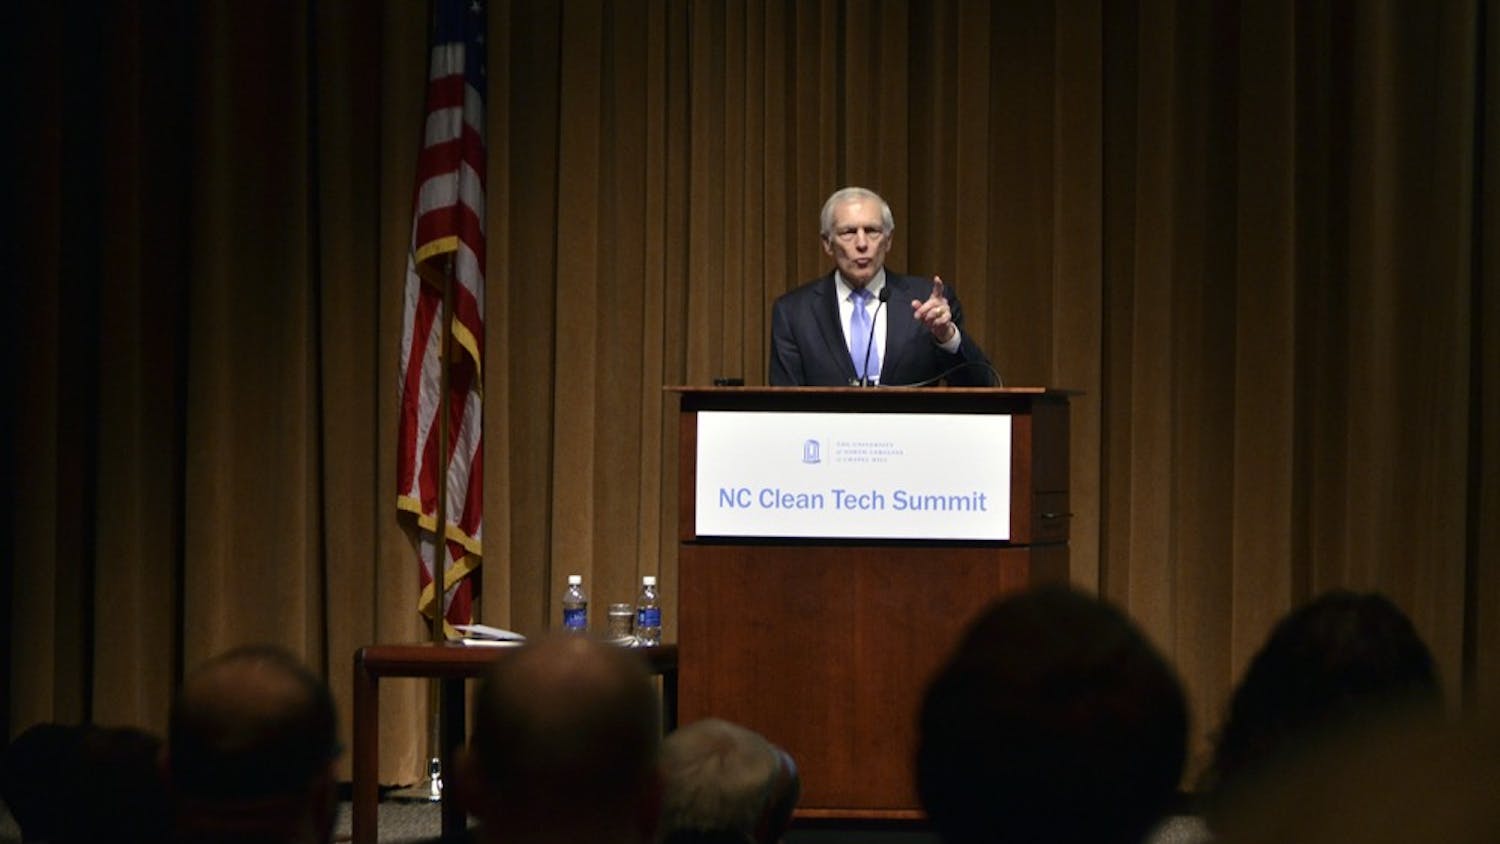 General Wesley Clark was the keynote speaker at the North Carolina Clean Tech Summit on Thursday at the Friday Center.